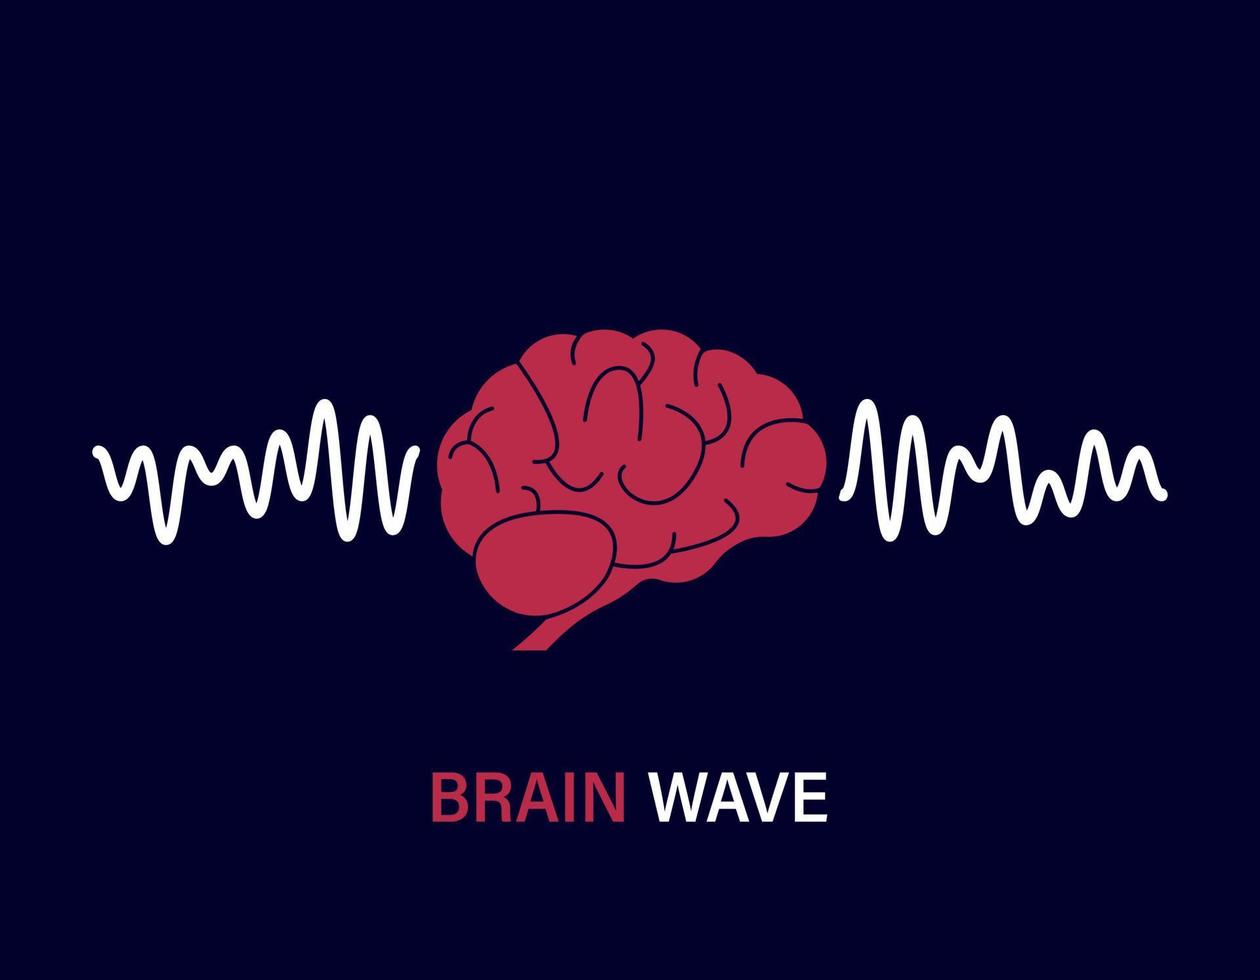 Human Brain Waves. Brain Activity Wave concept. Pink Mind with Mental Wave. Isolated blue background. Vector illustration.